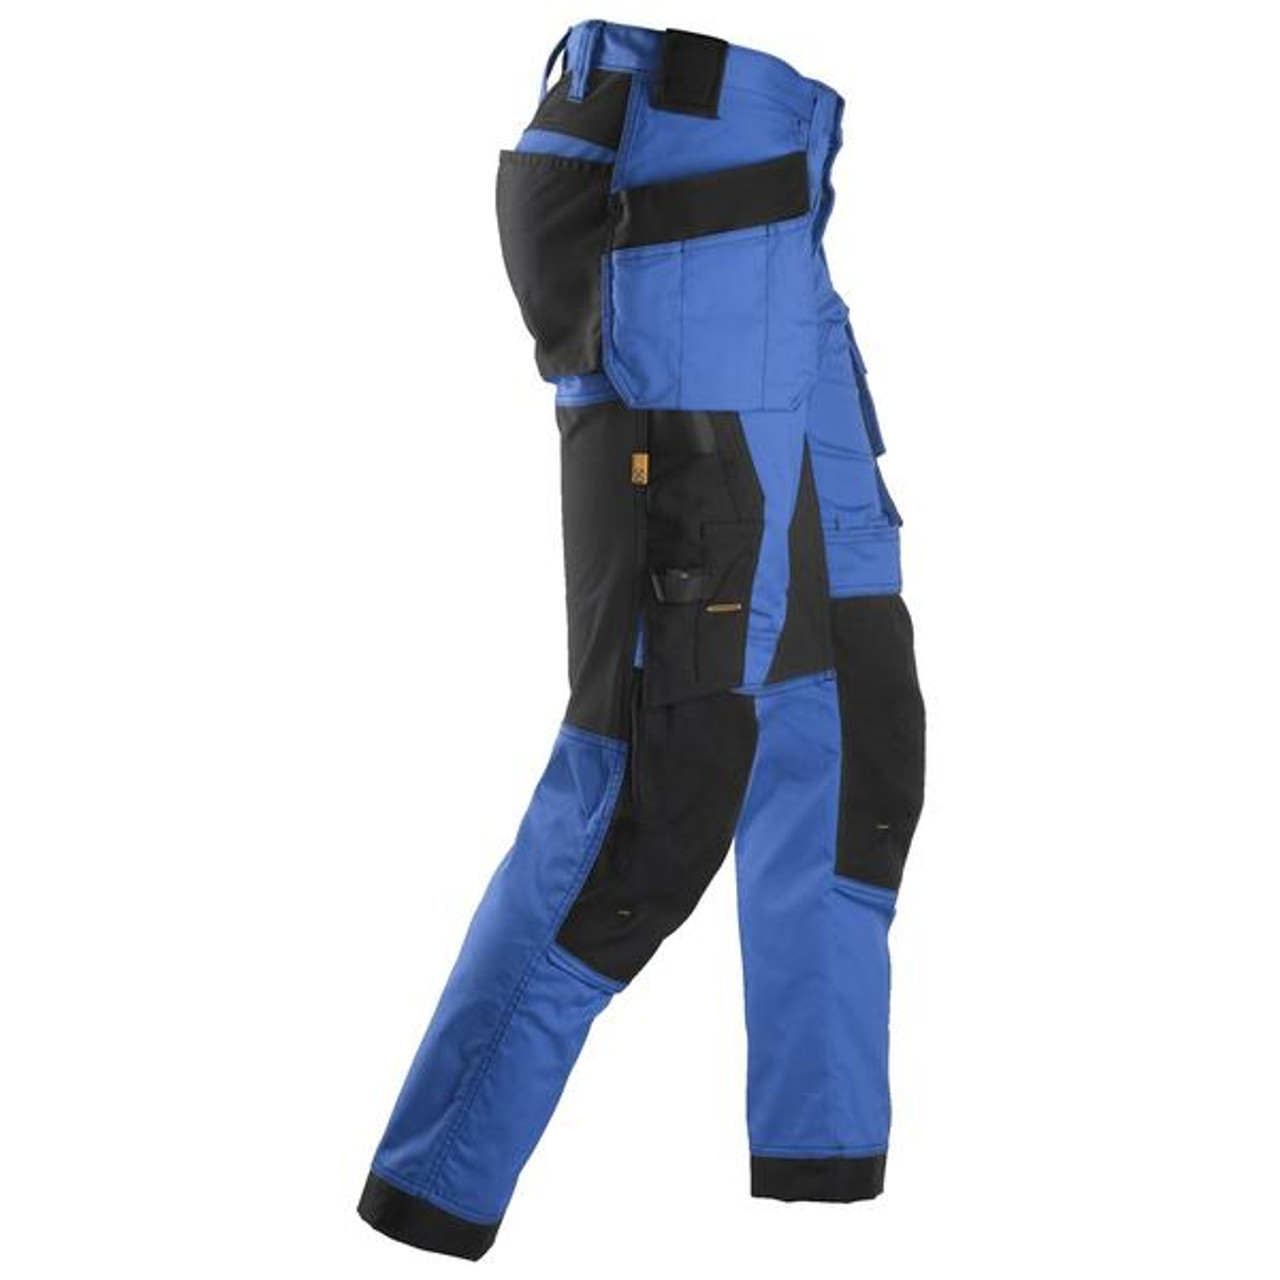 SNICKERS Trousers | 6241 True Blue Holster Pocket for use as Trousers for Mens Trousers, Carpentry and Electricians